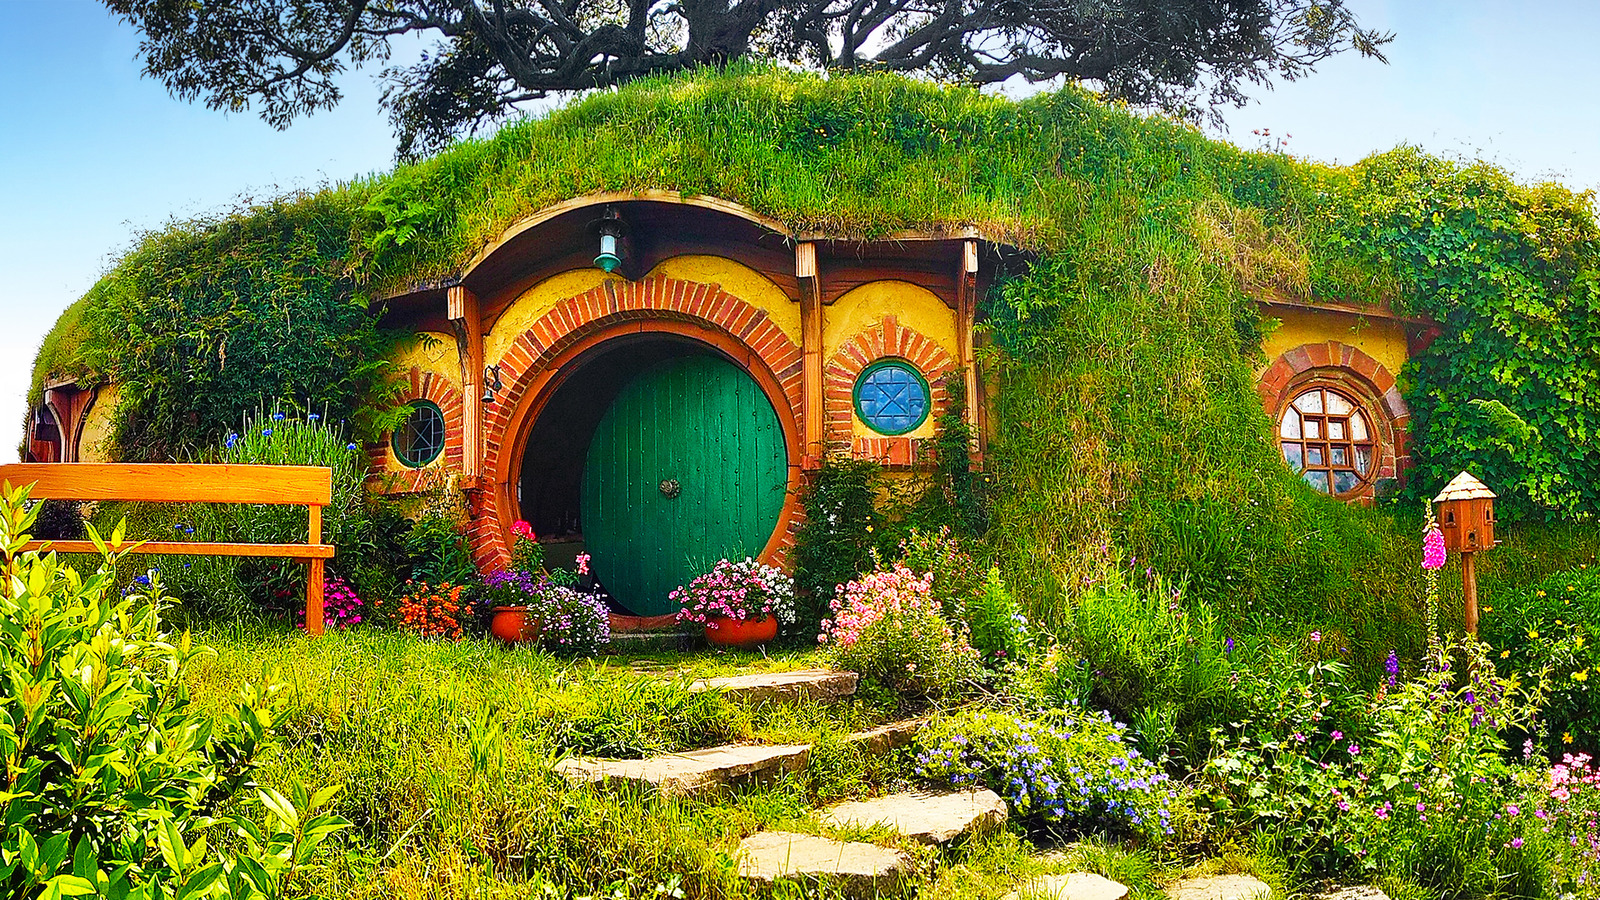 Dicht woordenboek Taalkunde 5 Classy Ways To Incorporate Lord Of The Rings Into Your Home Décor